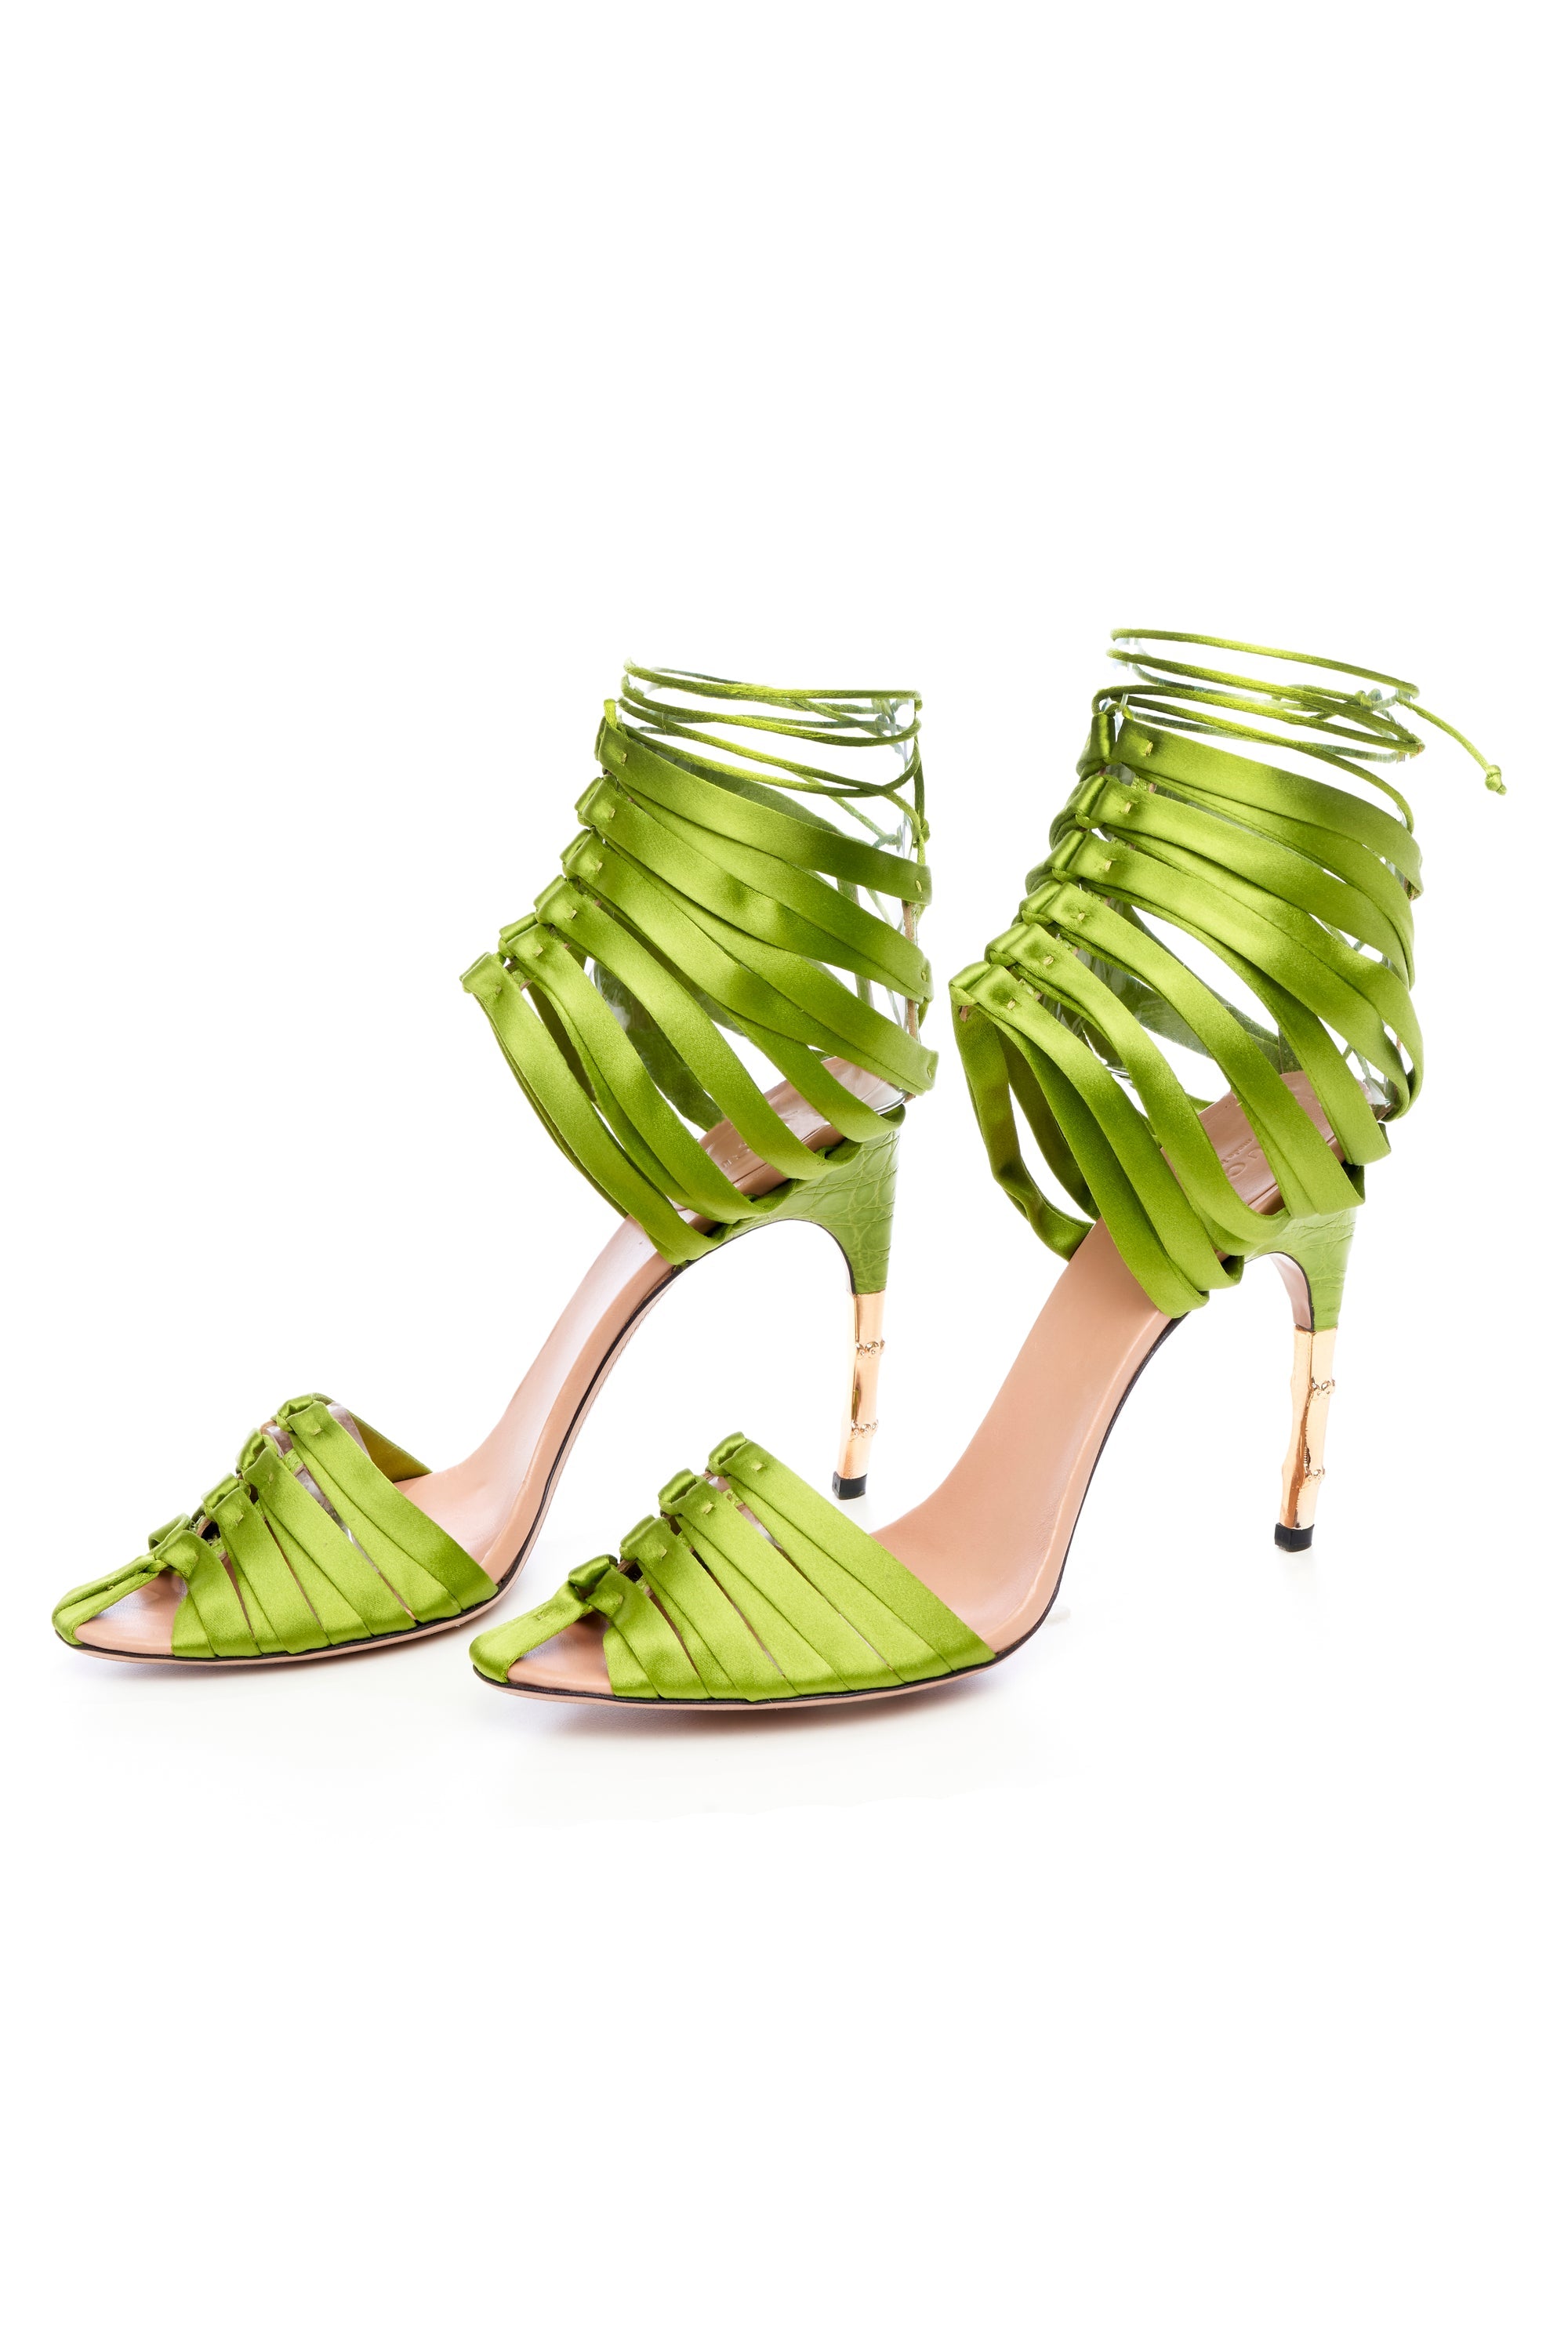 Gucci Tom Ford Green Lace Up Heels